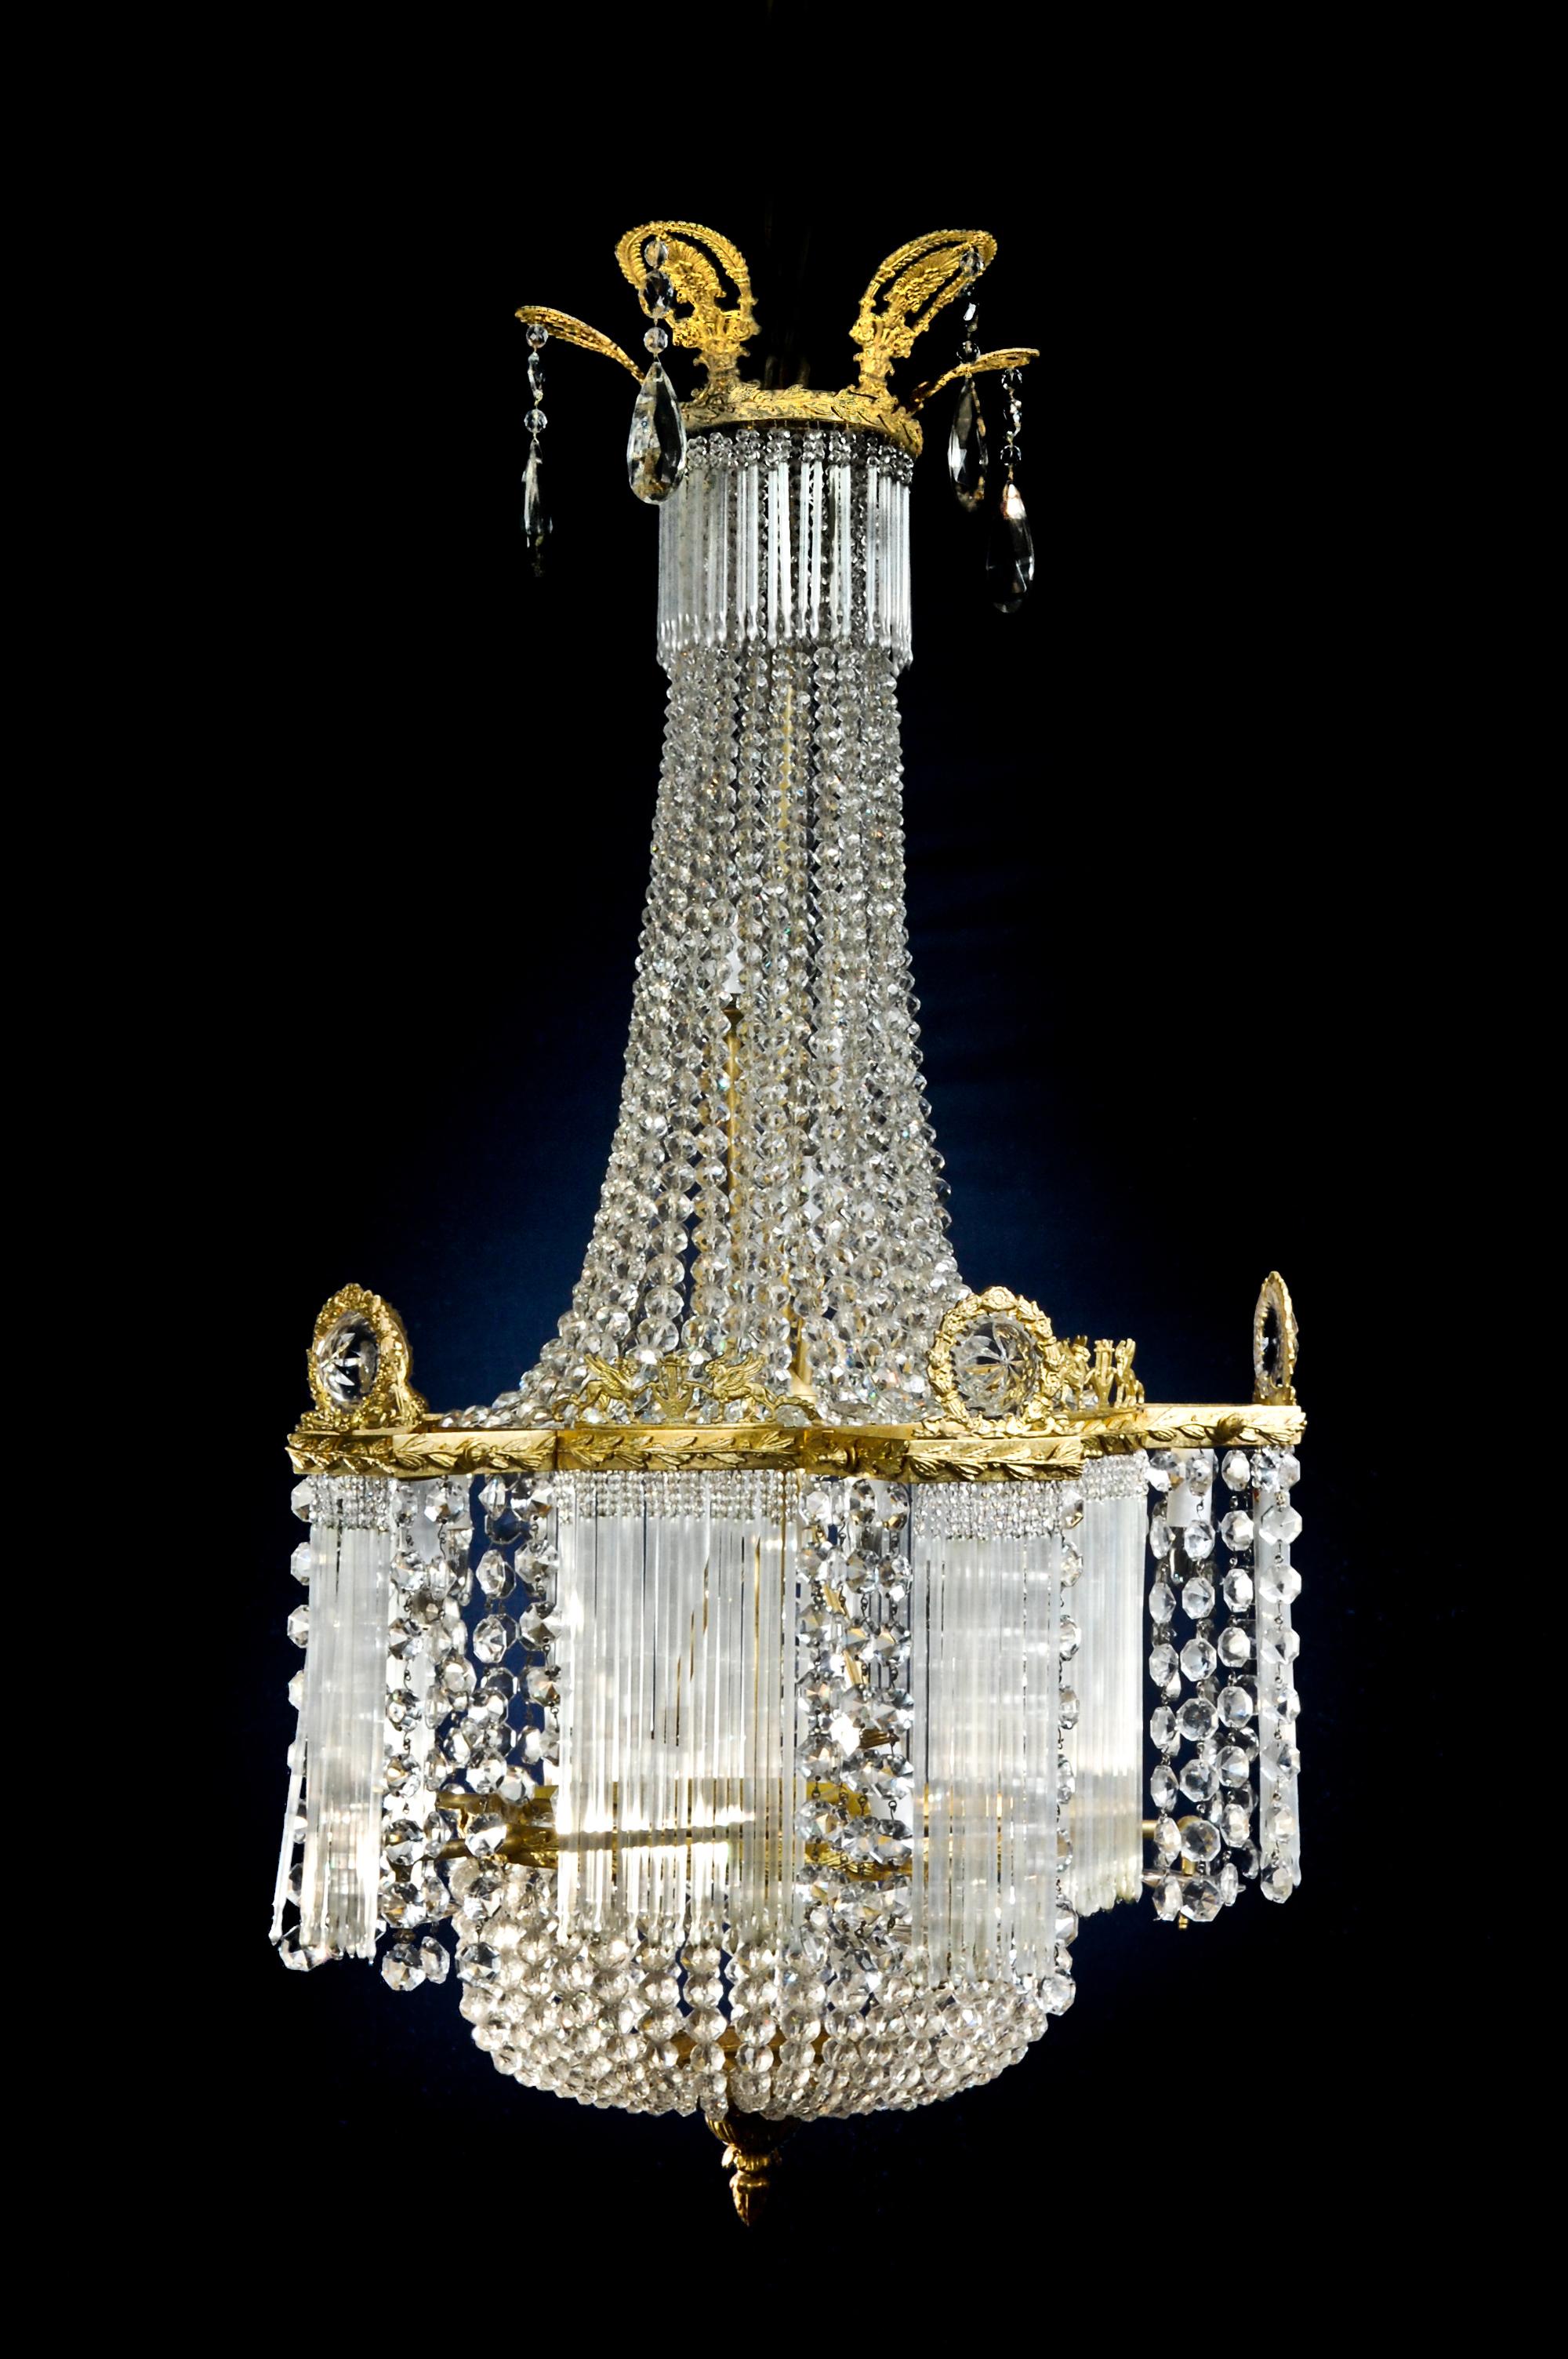 A unique antique French Louis XVI style multi-light gilt bronze and cut crystal multi light chandelier of unusual form embellished with cut crystal prisms, chains and further adorned with gilt bronze mounts depicting neoclassical griffins with